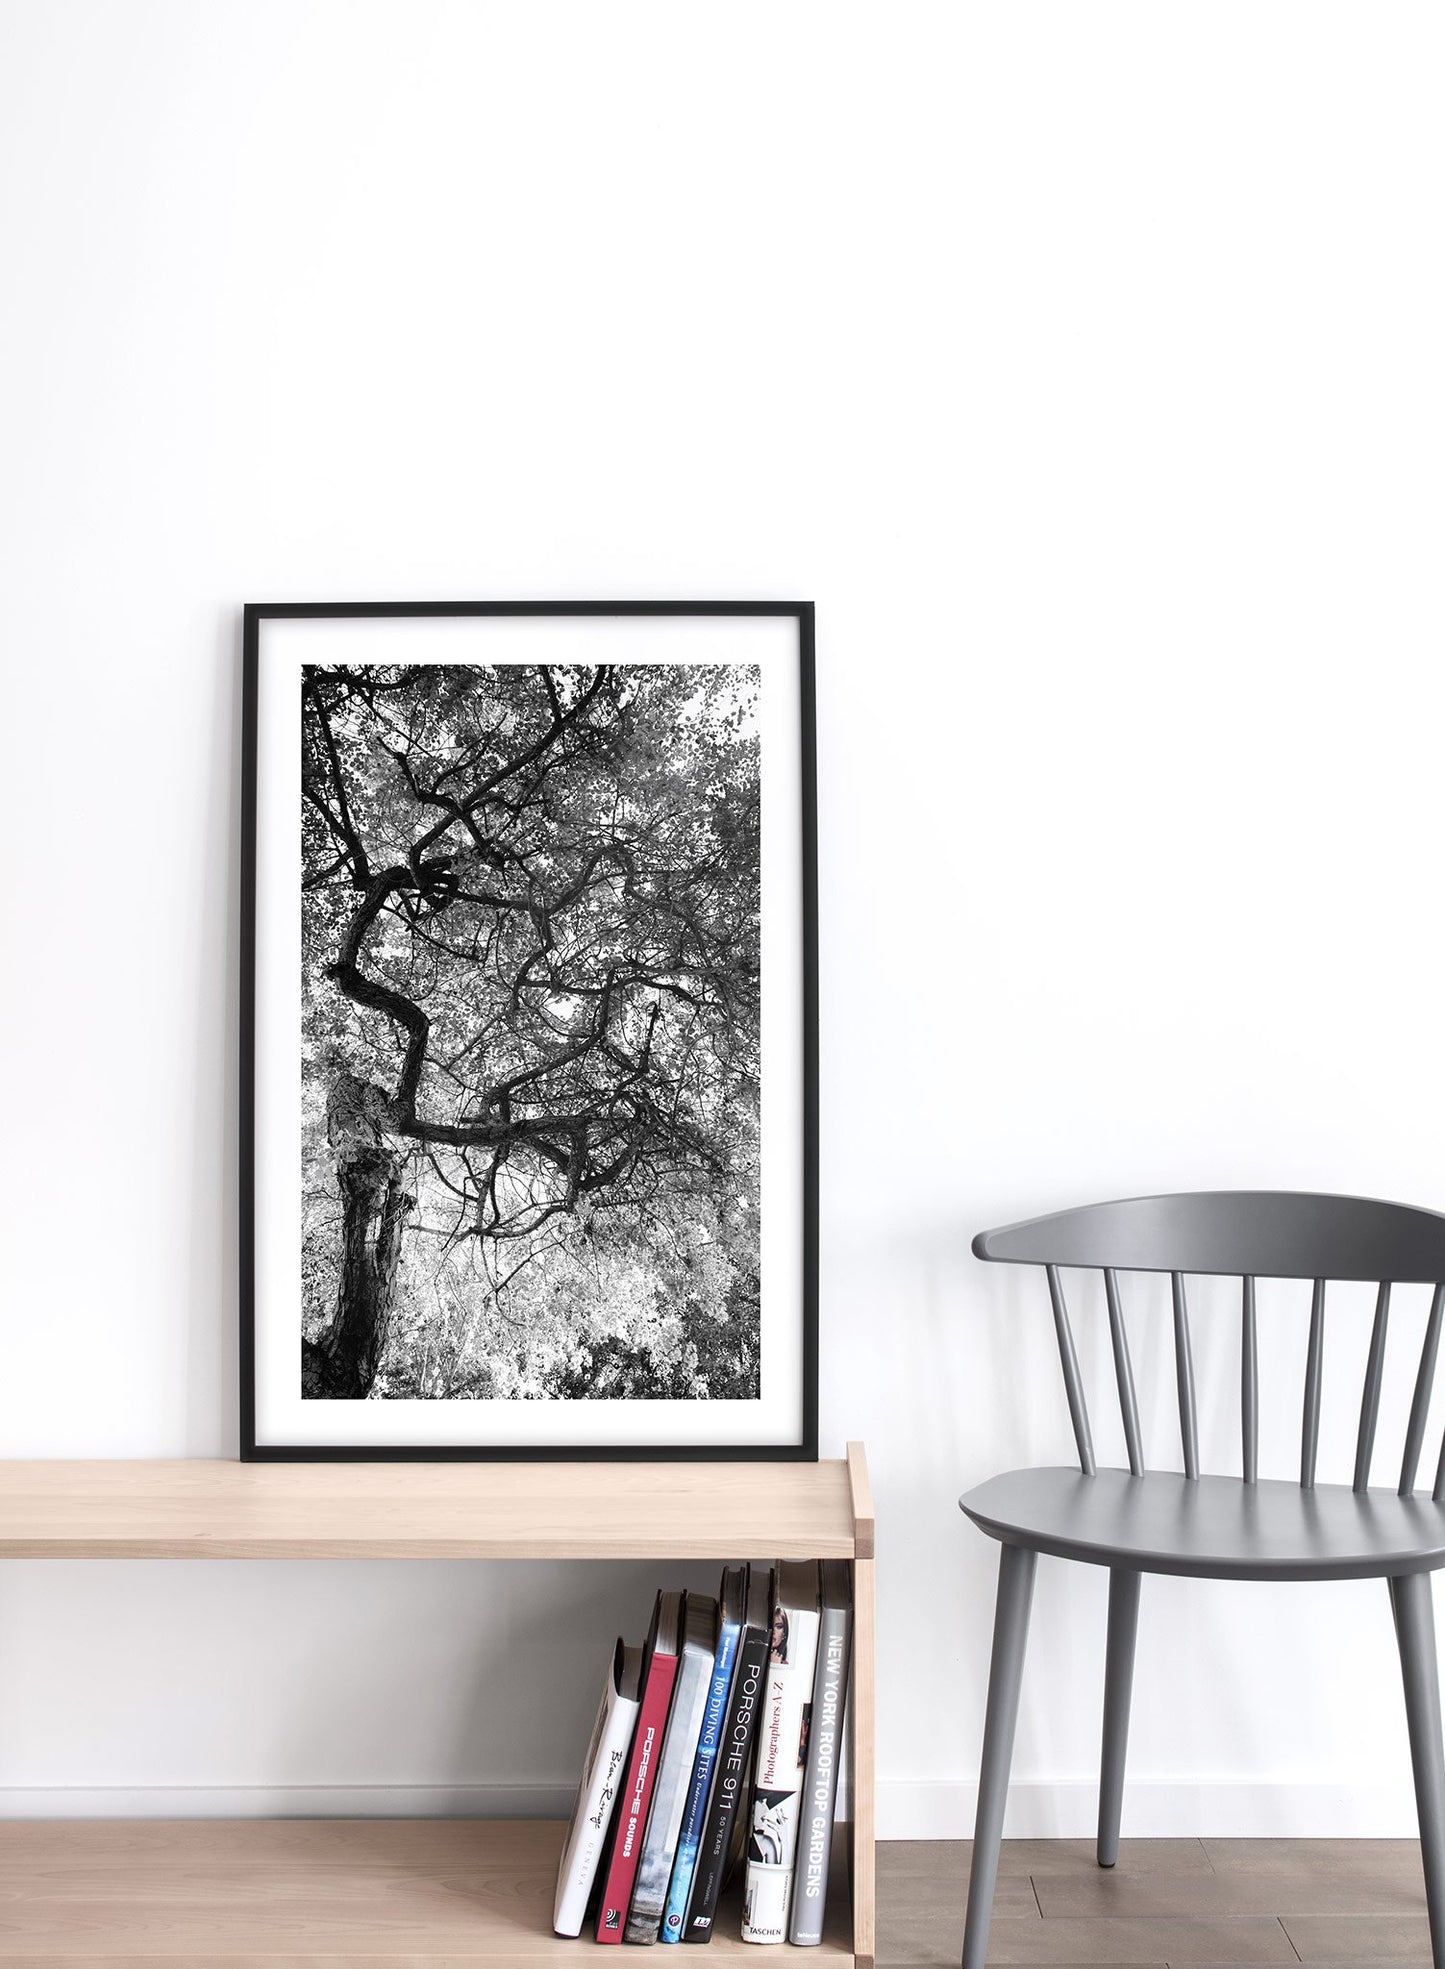 Modern minimalist poster by Opposite Wall with black and white photography of dense foliage - Lifestyle - Entryway